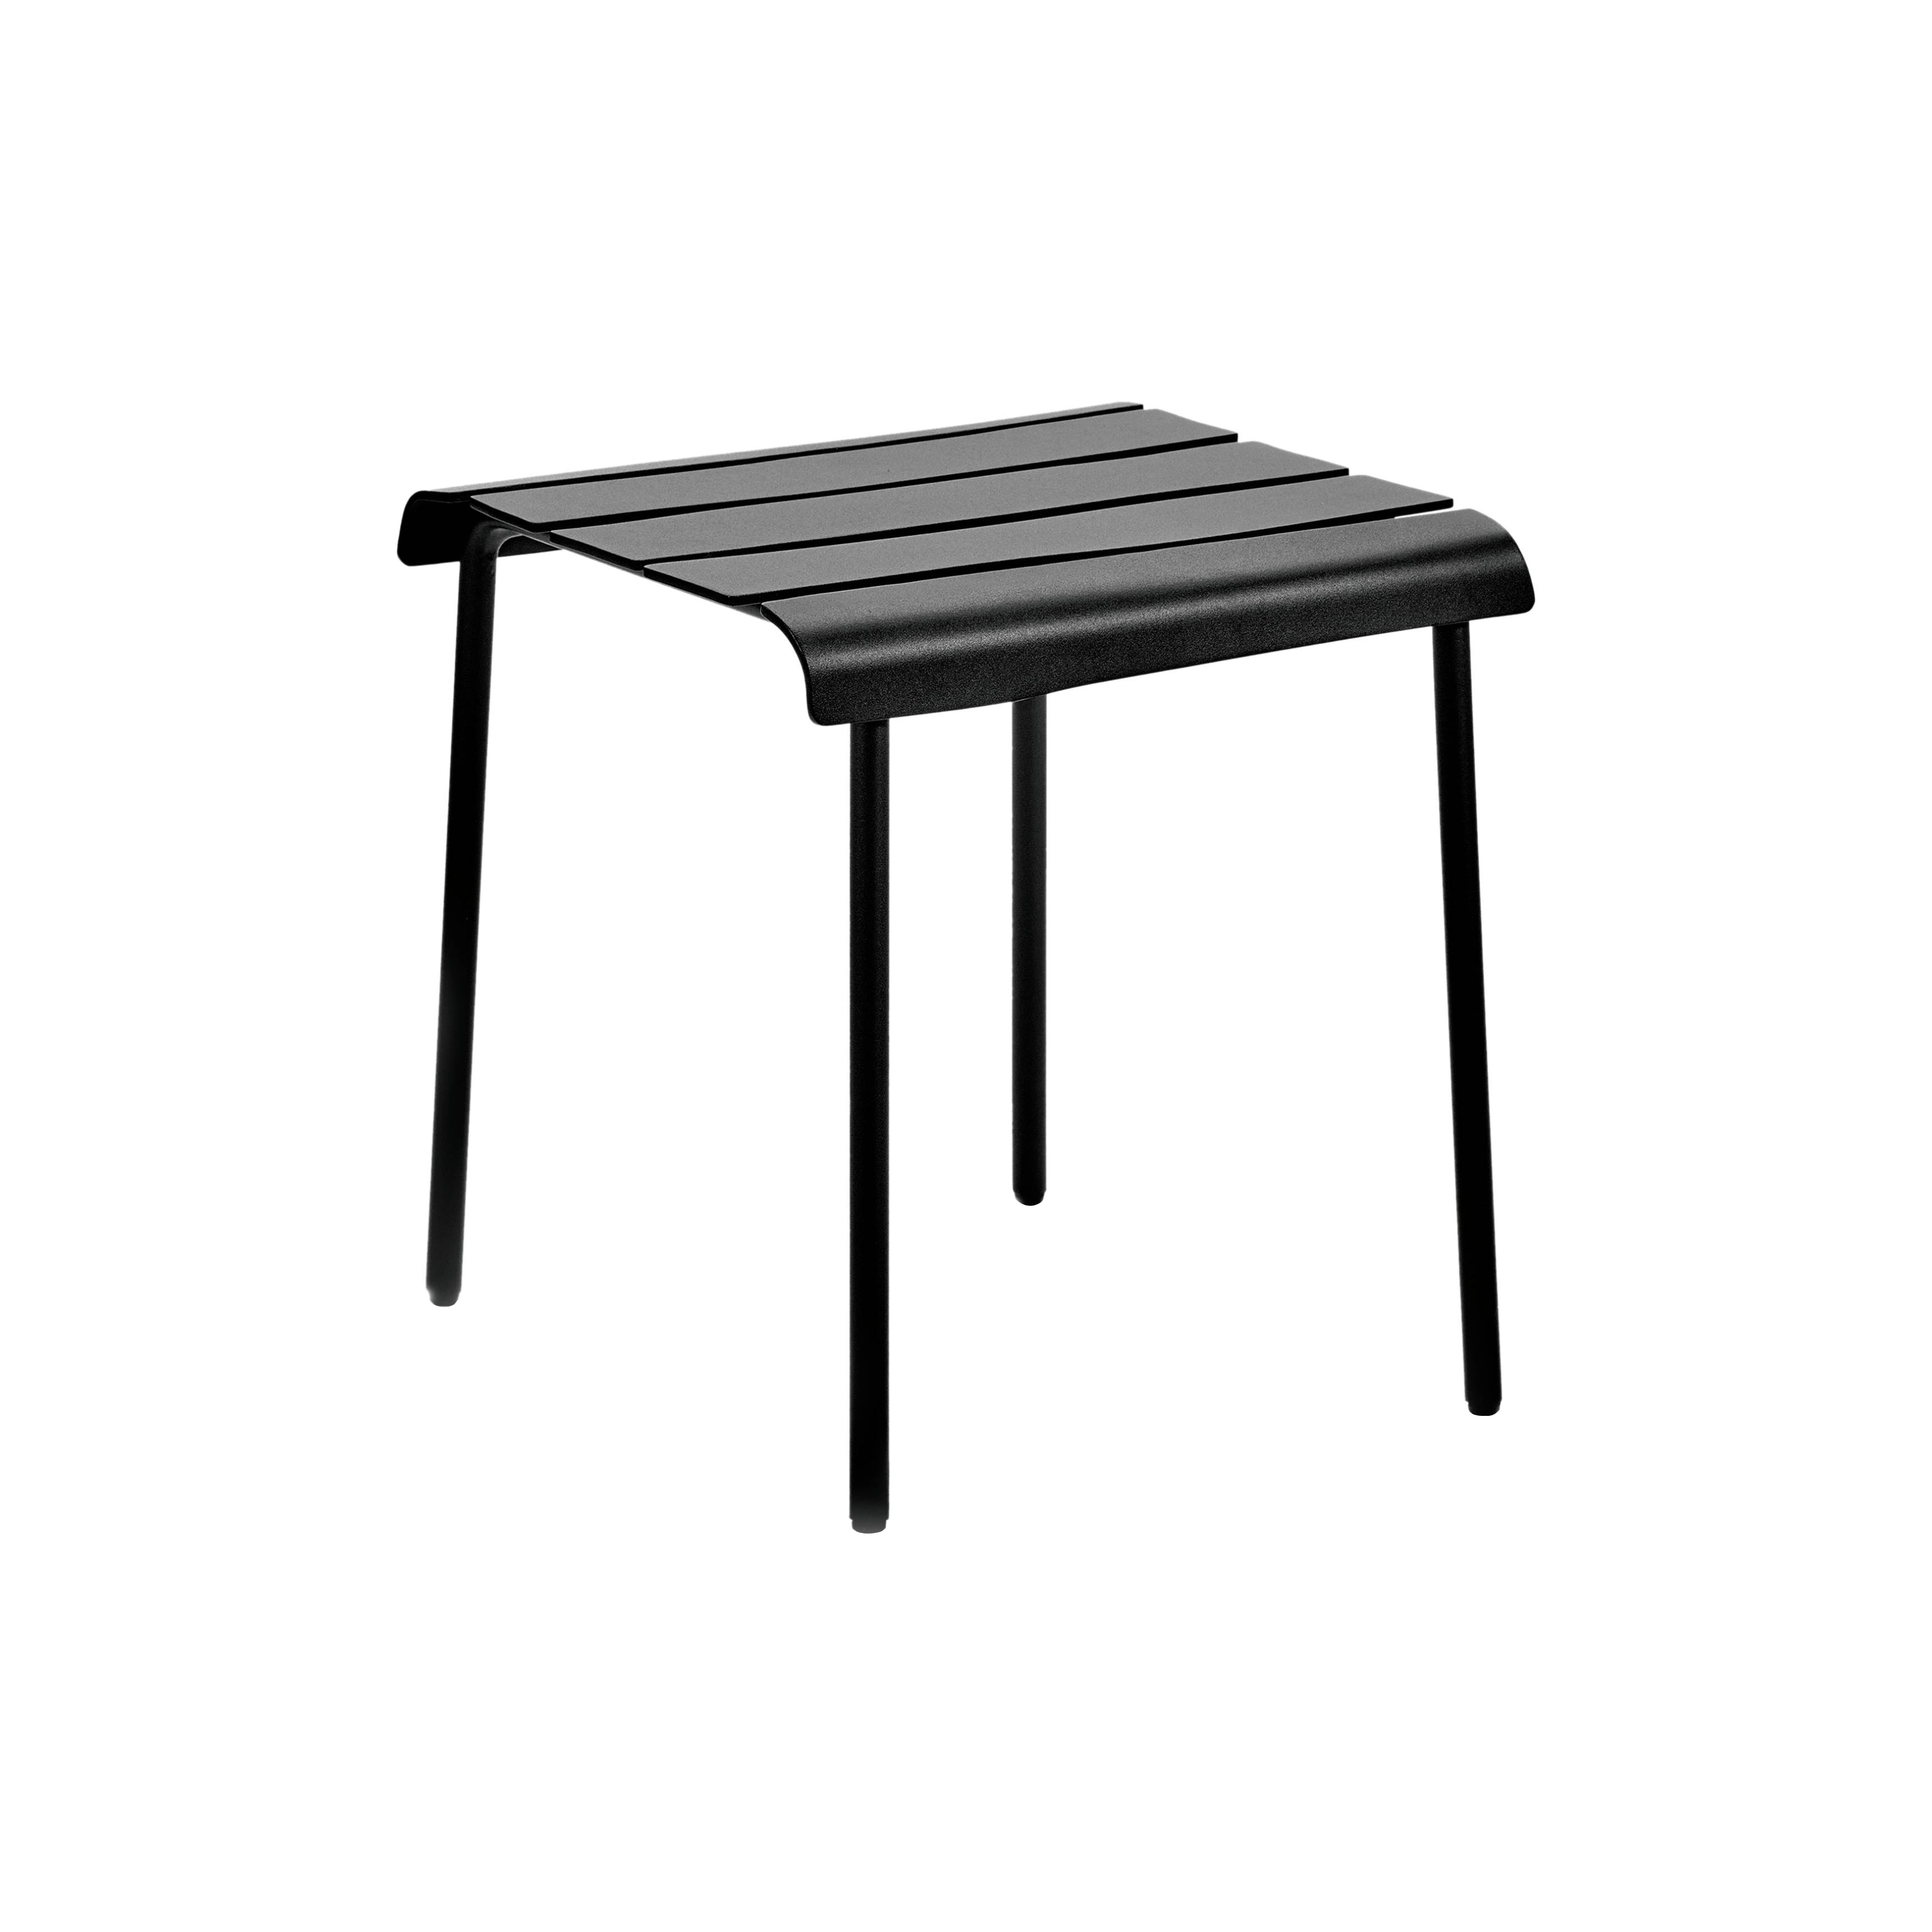 Aligned Outdoor Stool | Buy Valerie Objects online at A+R